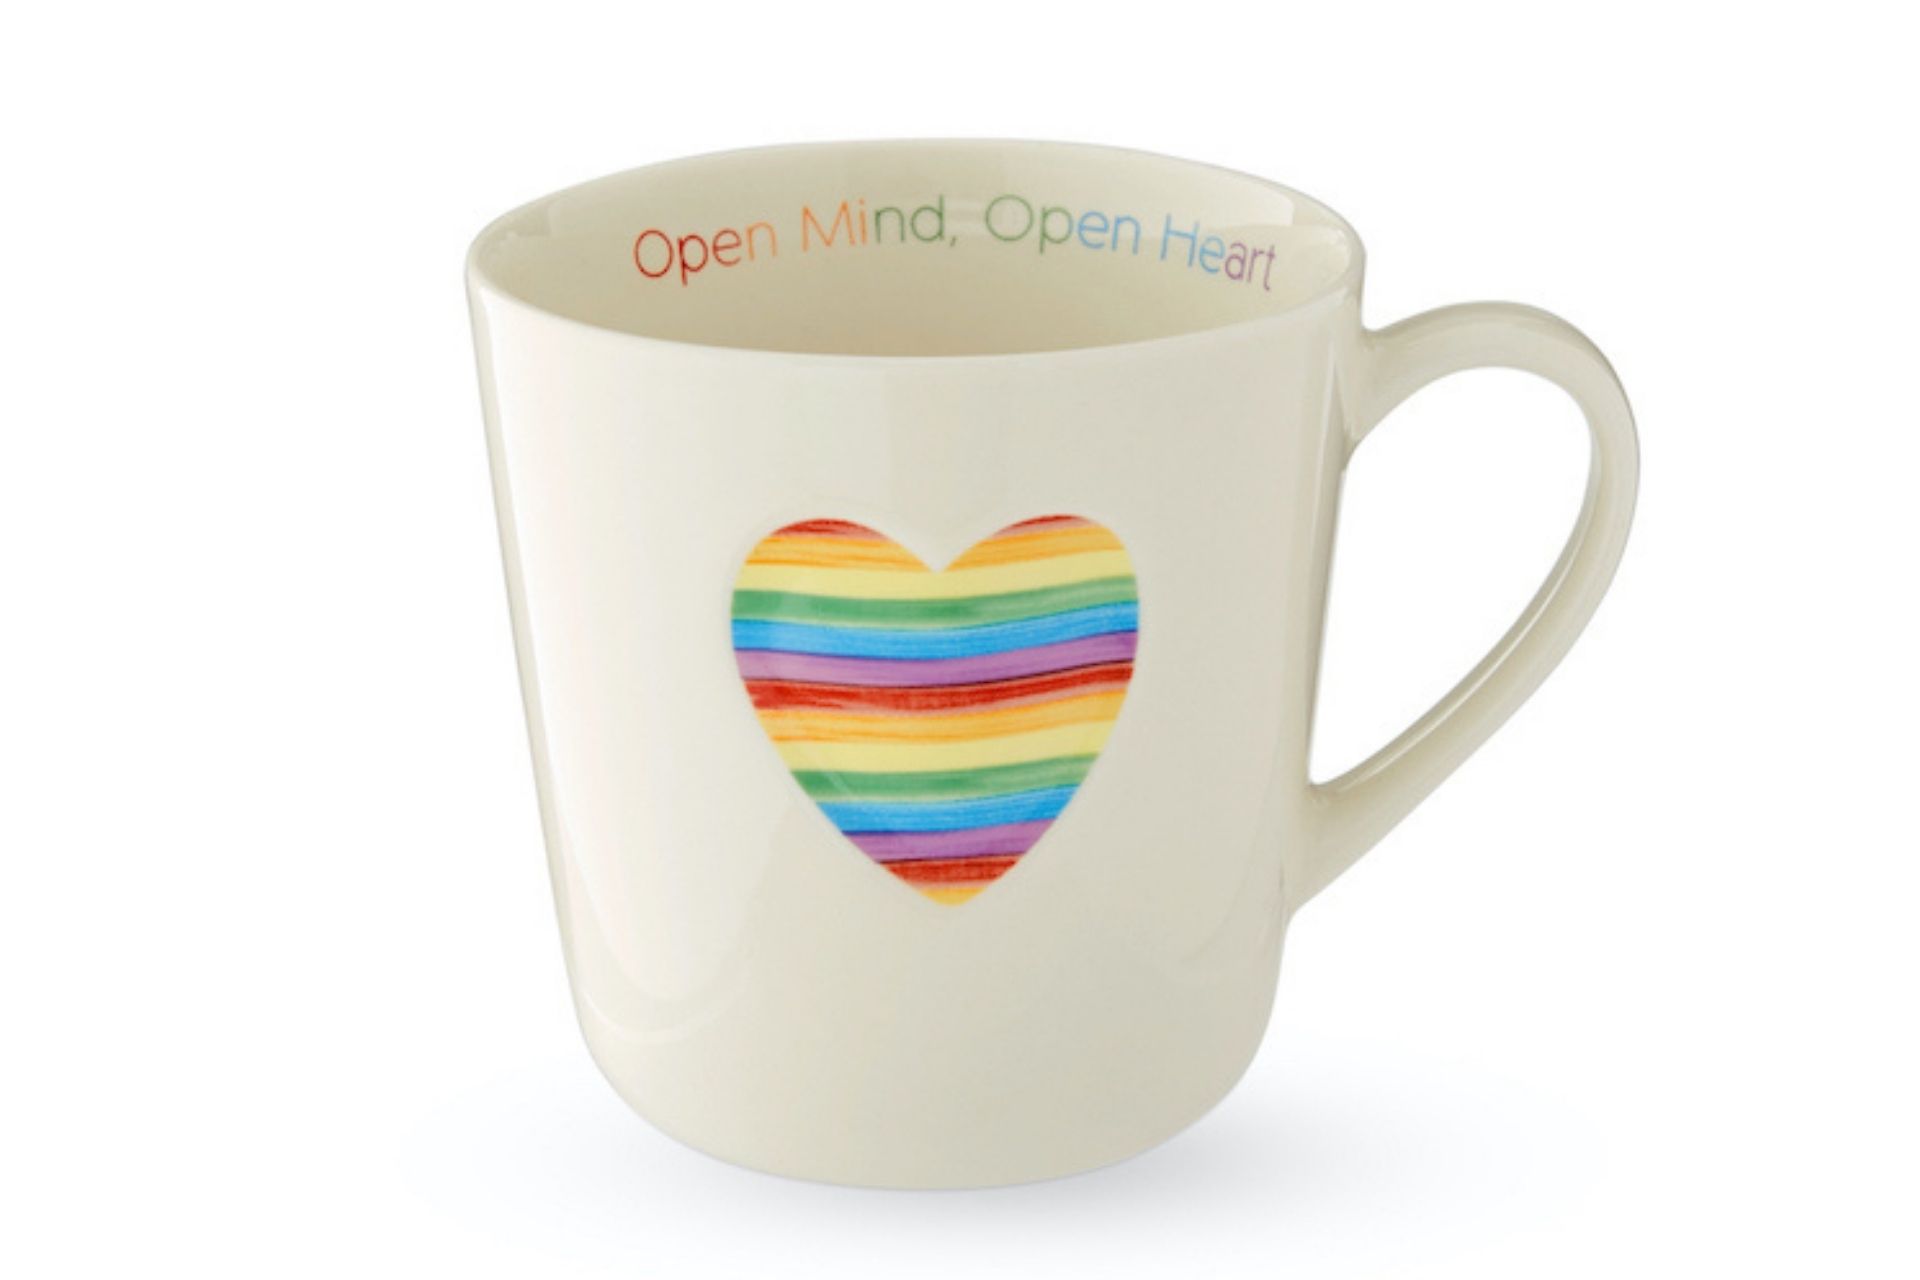 Williams-Sonoma Teams With Trevor Project After Strong Q1